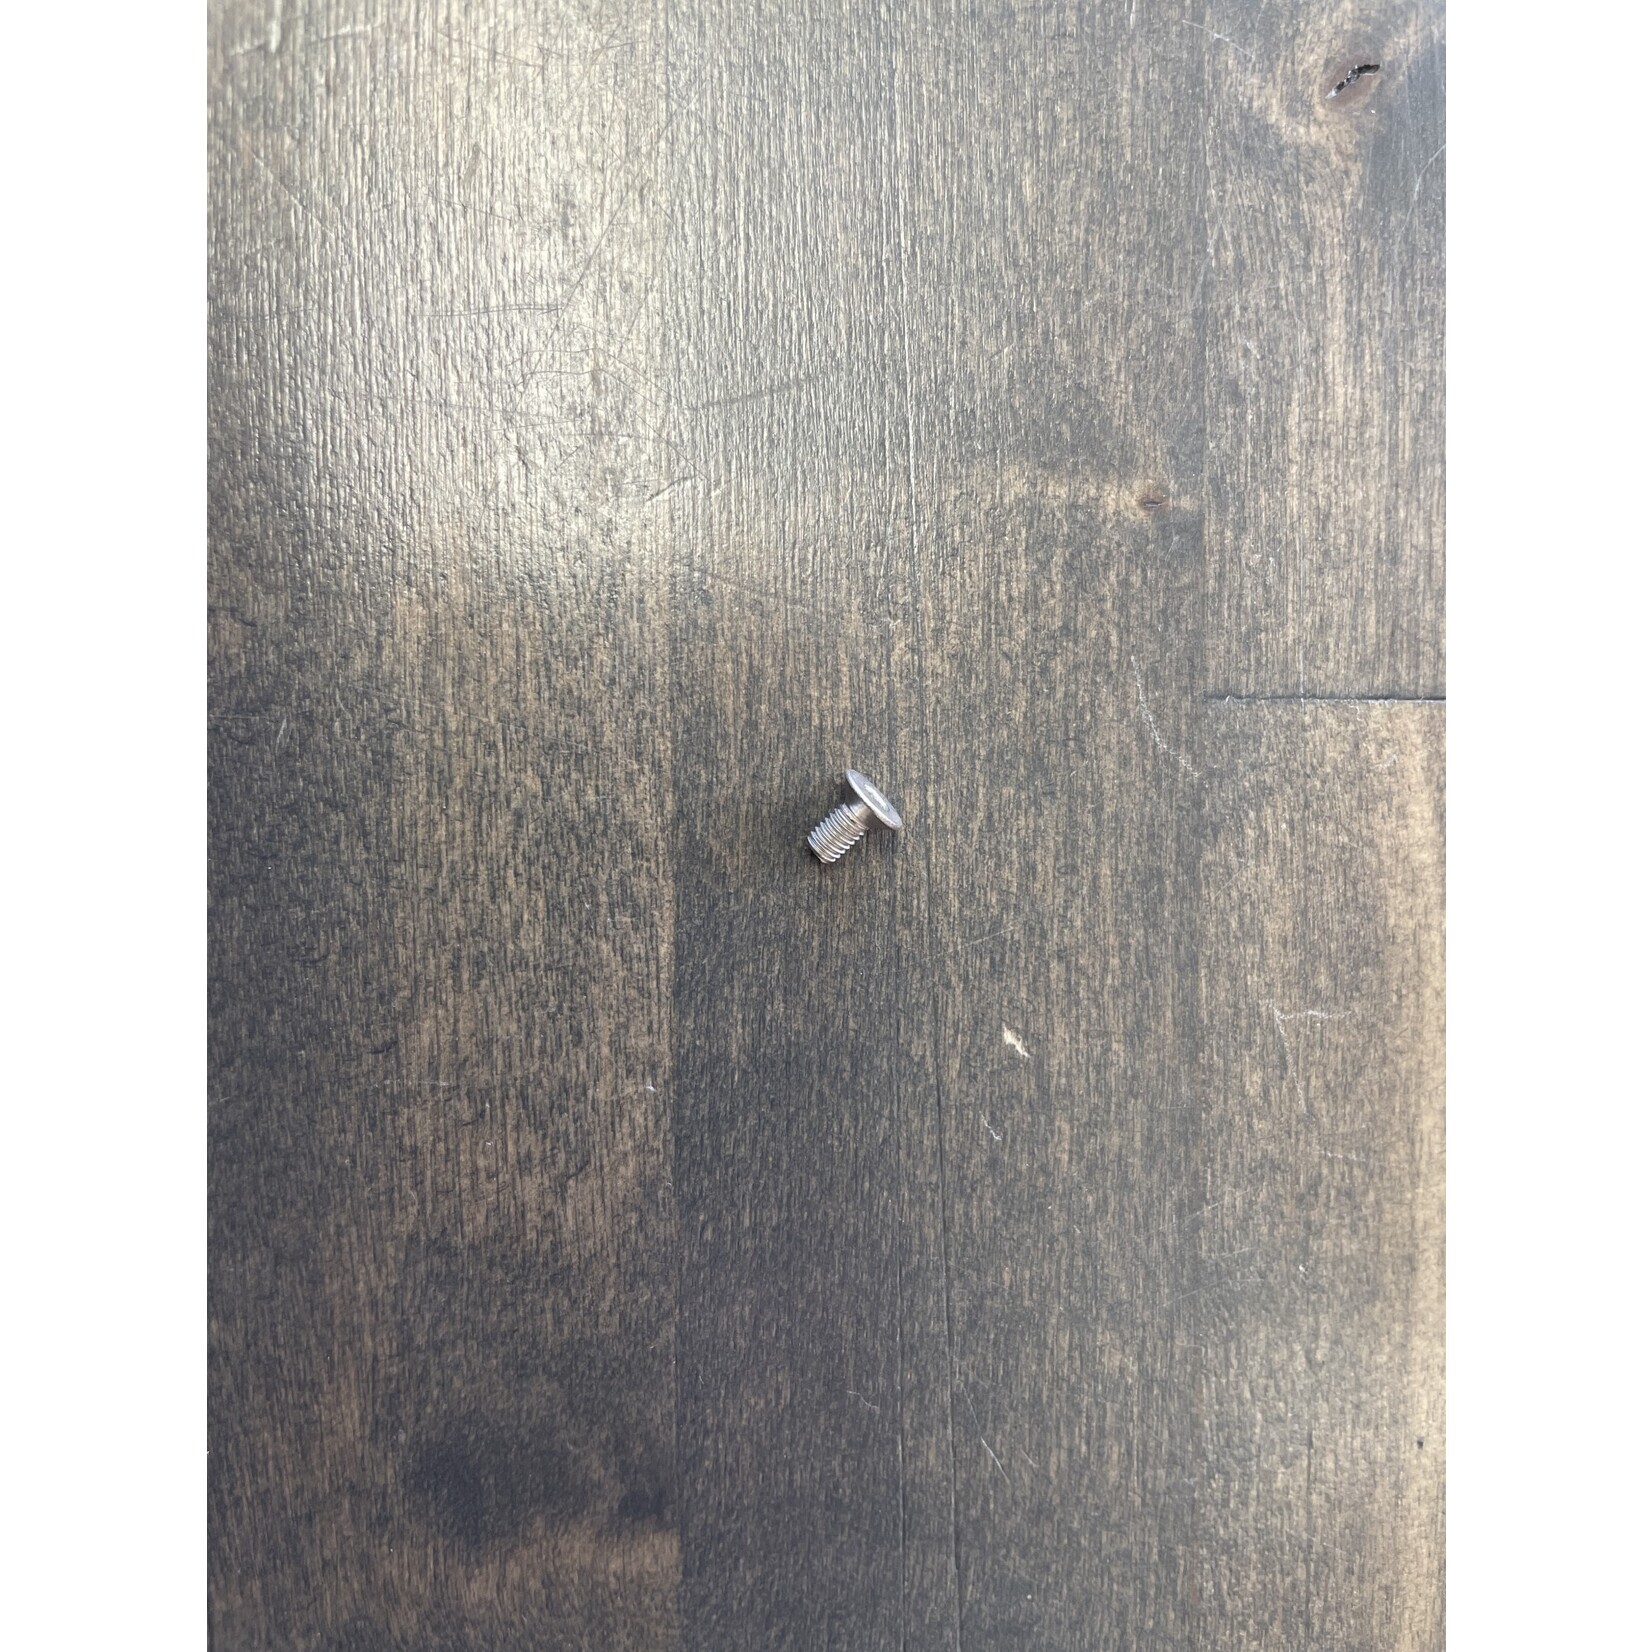 Clydesdale cable guide insert screw